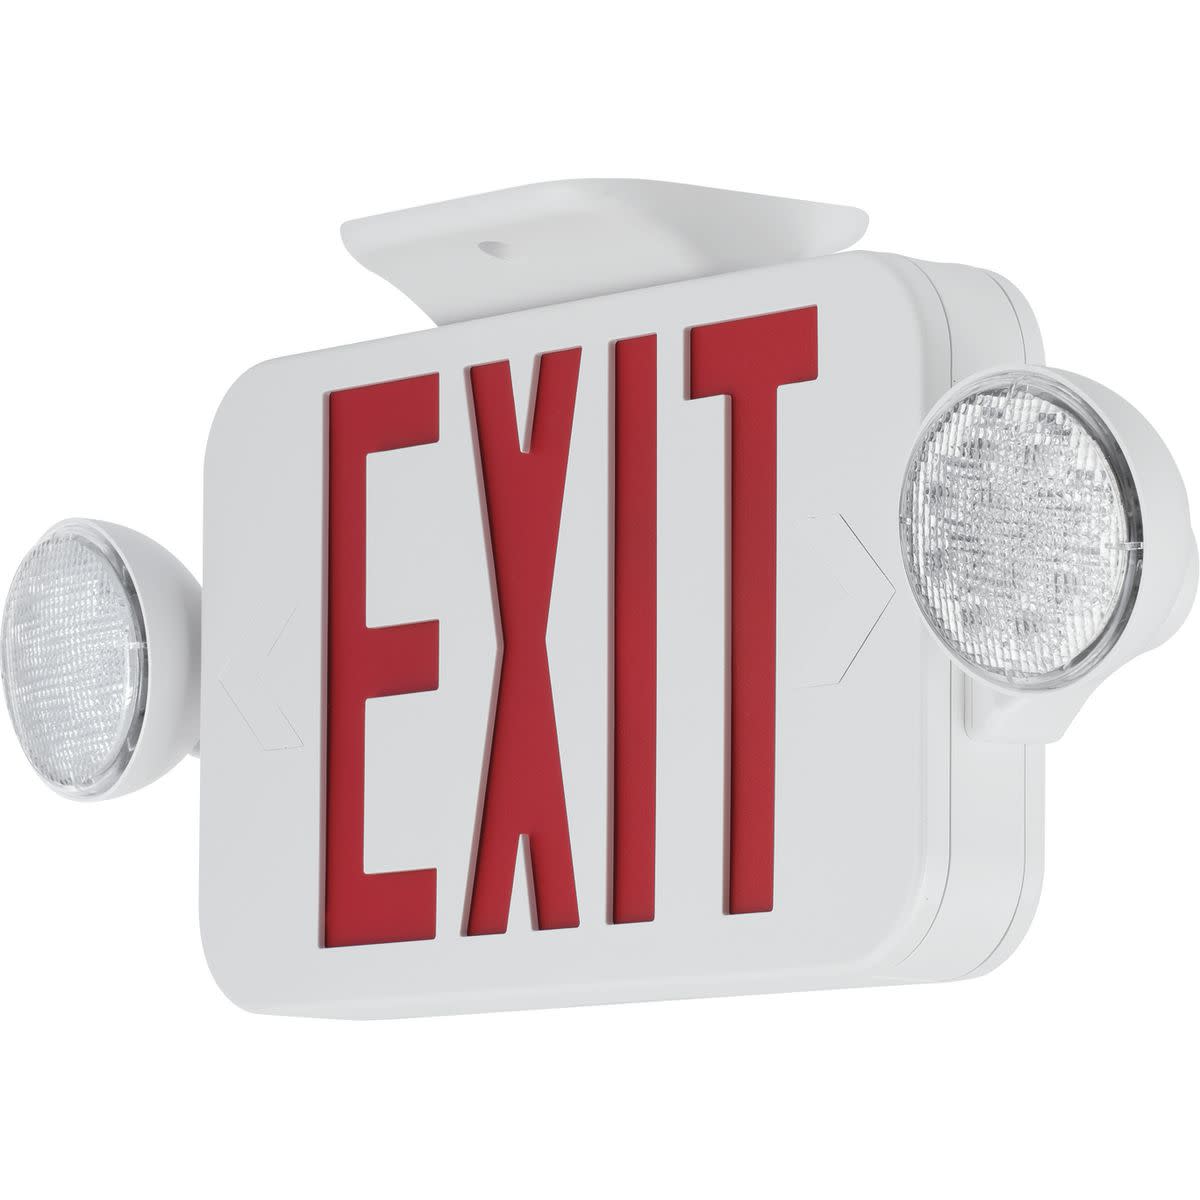 PECUE-UR-30-Progress Commercial Lighting-18 Inch 3.18W LED Universal Exit/Emergency Sign Light - image 1 of 2